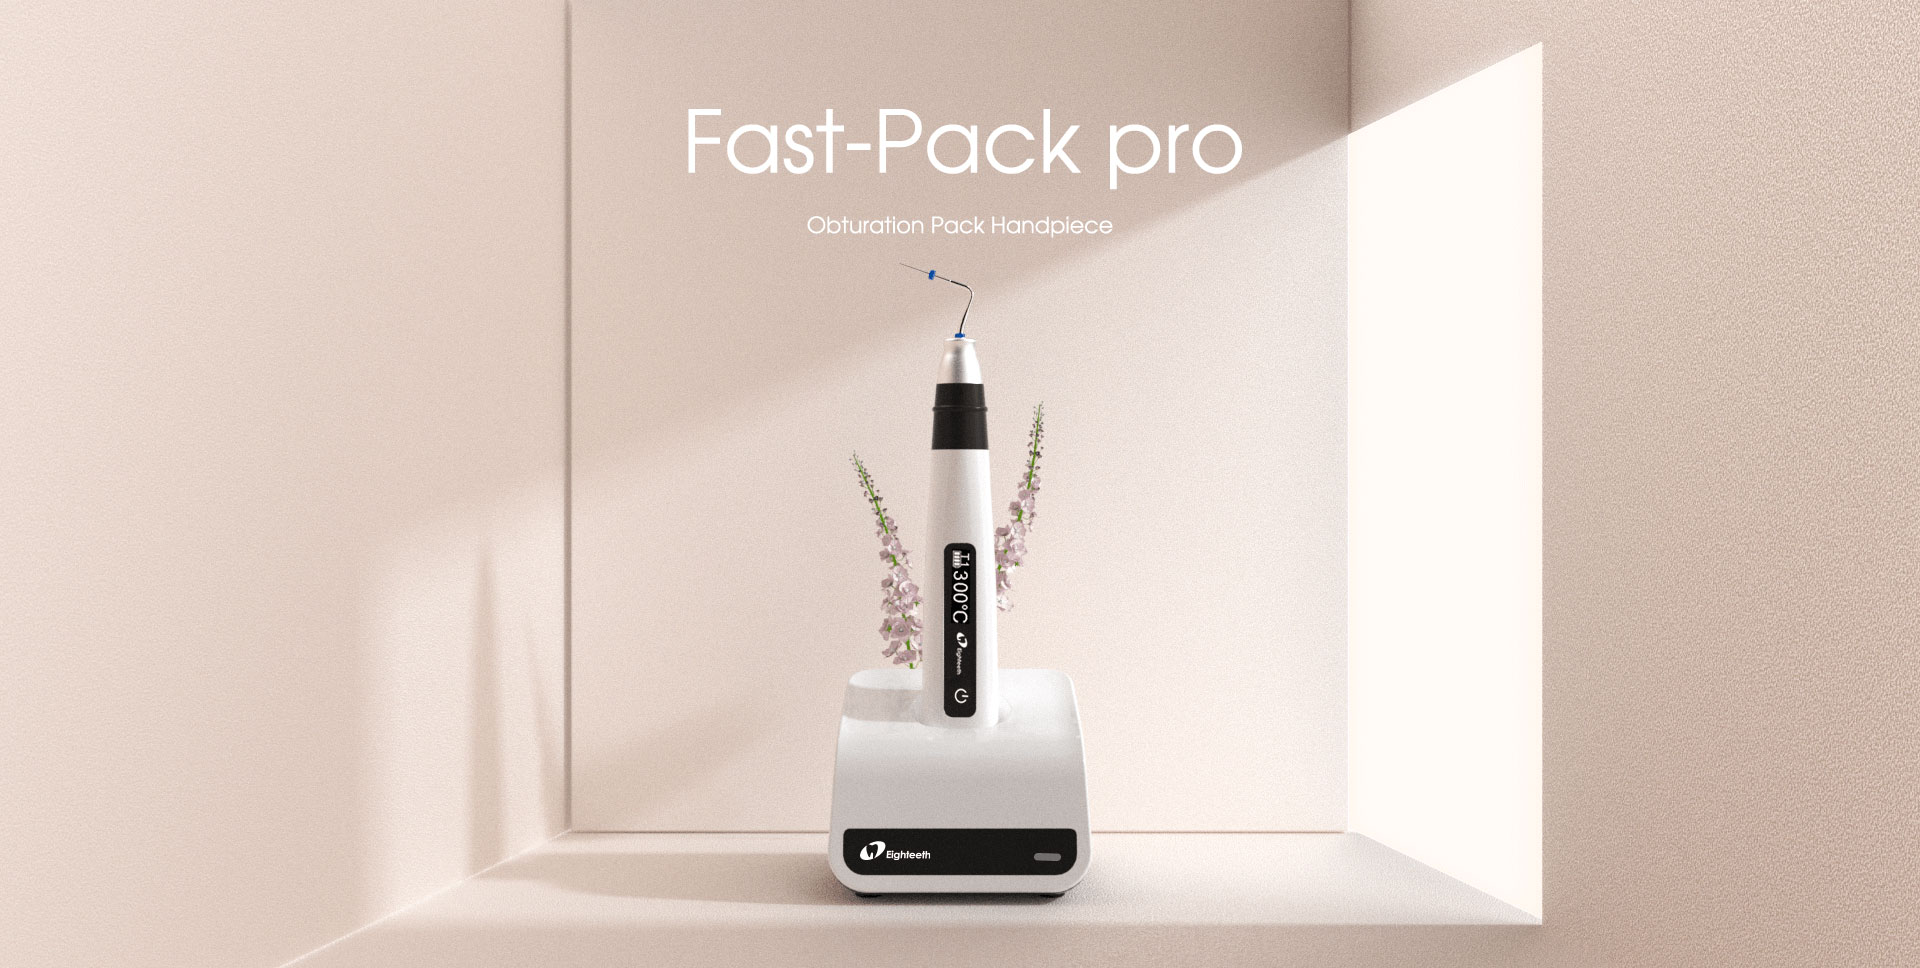 Fast-Pack pro